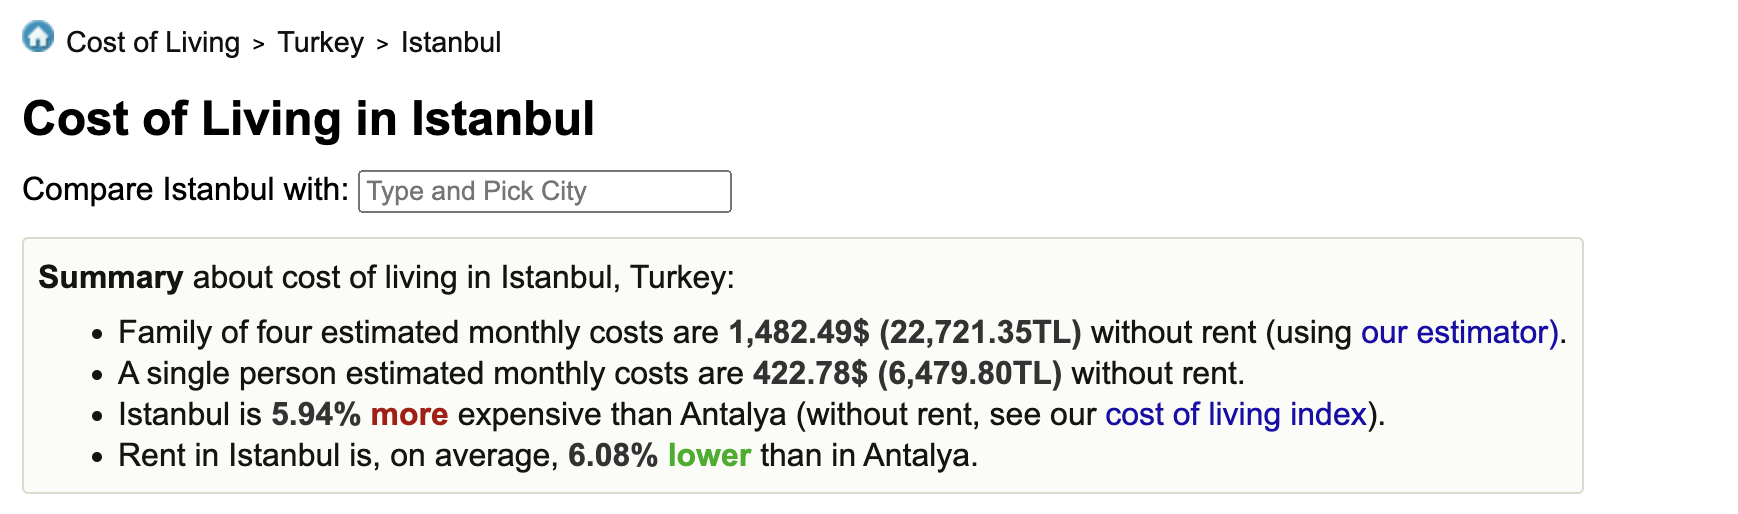 cost of living in İstanbul.png